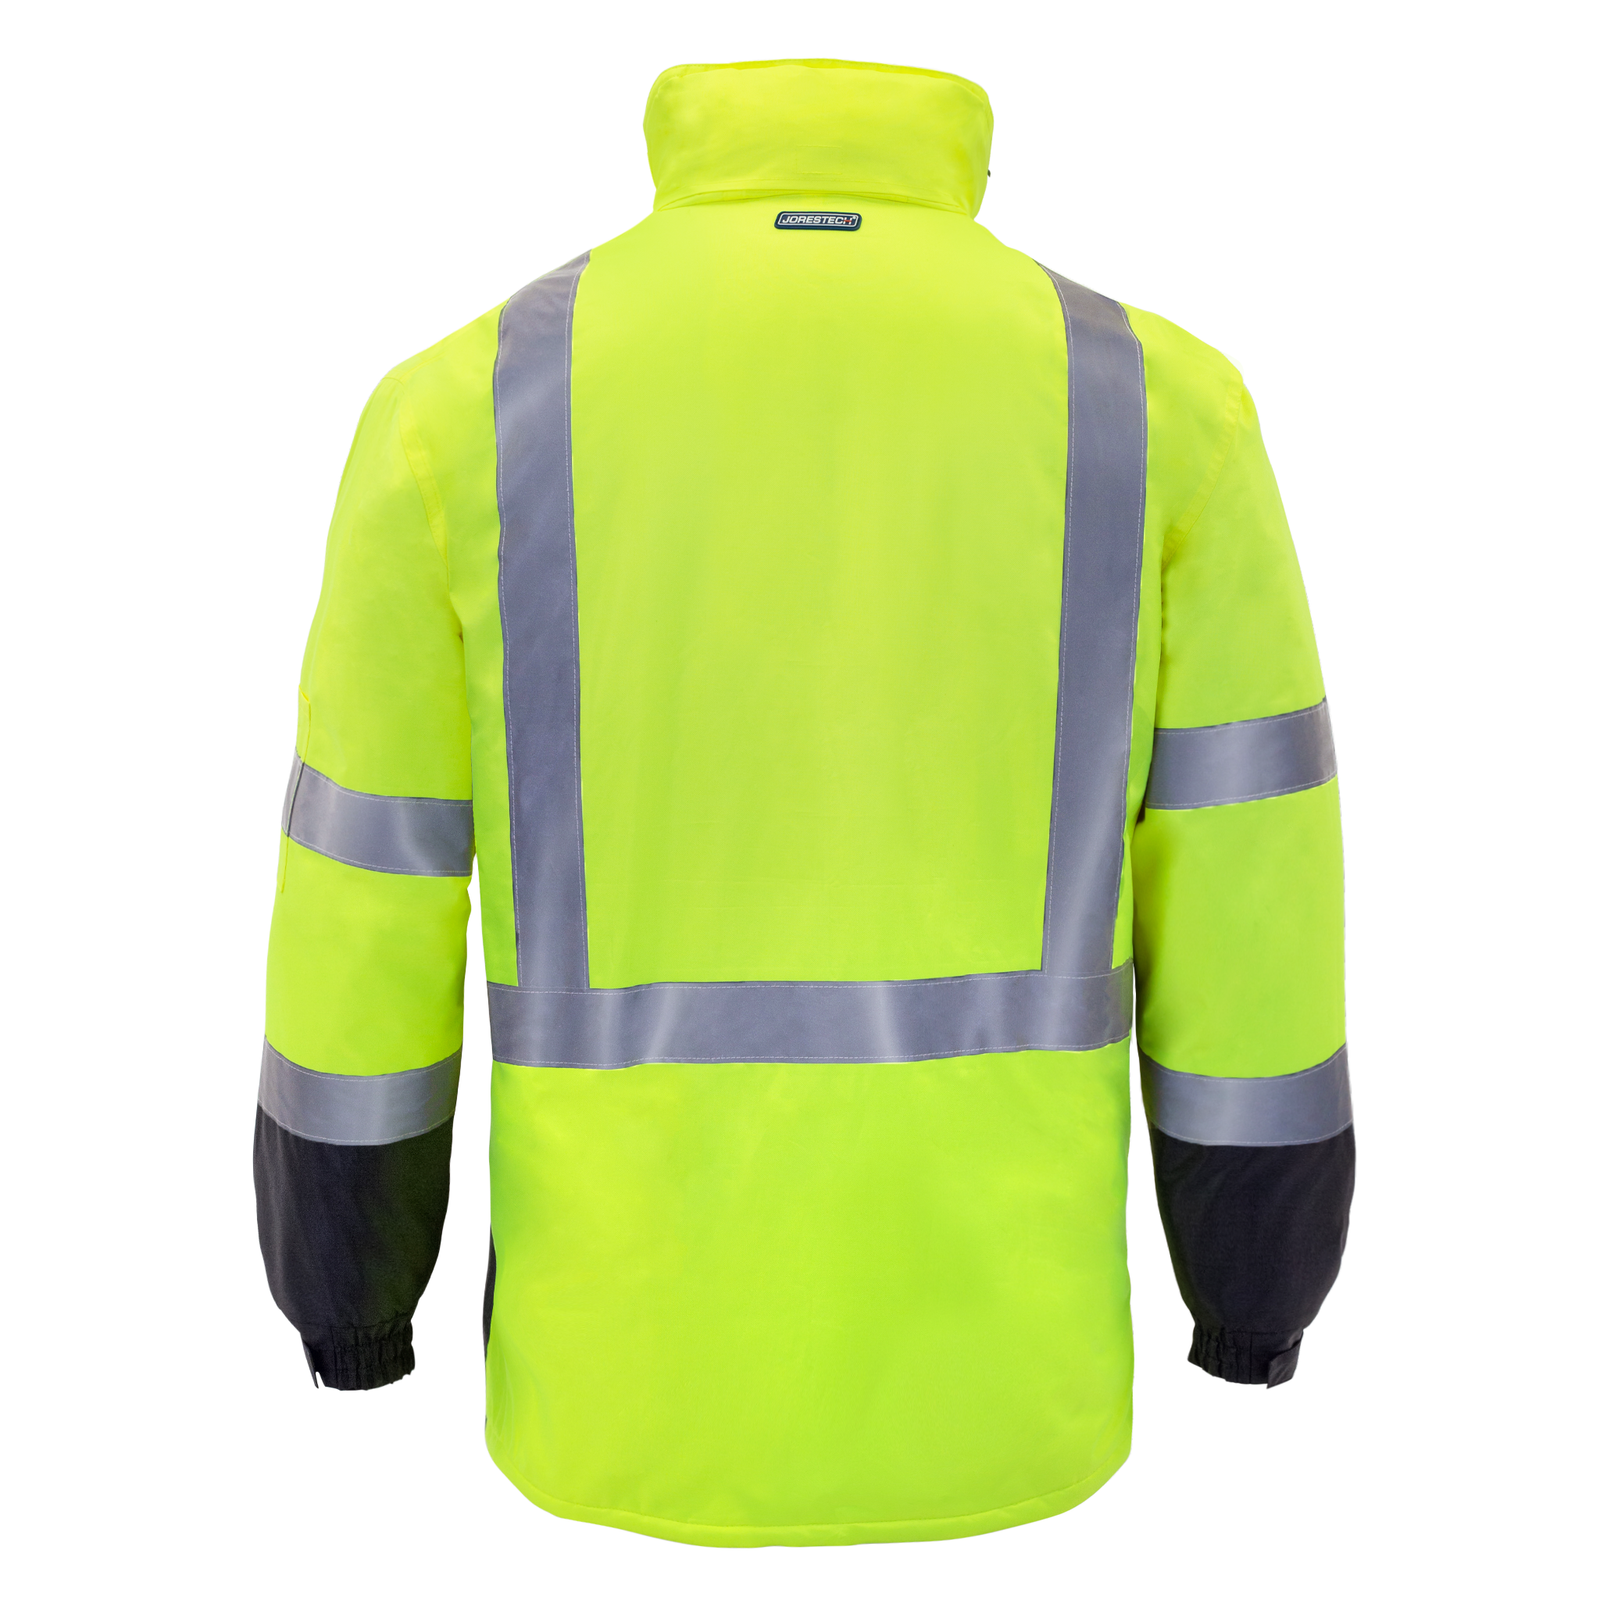 ANSI compliant high visibility yellow JORESTECH parka safety jacket with reflective stripes for winter